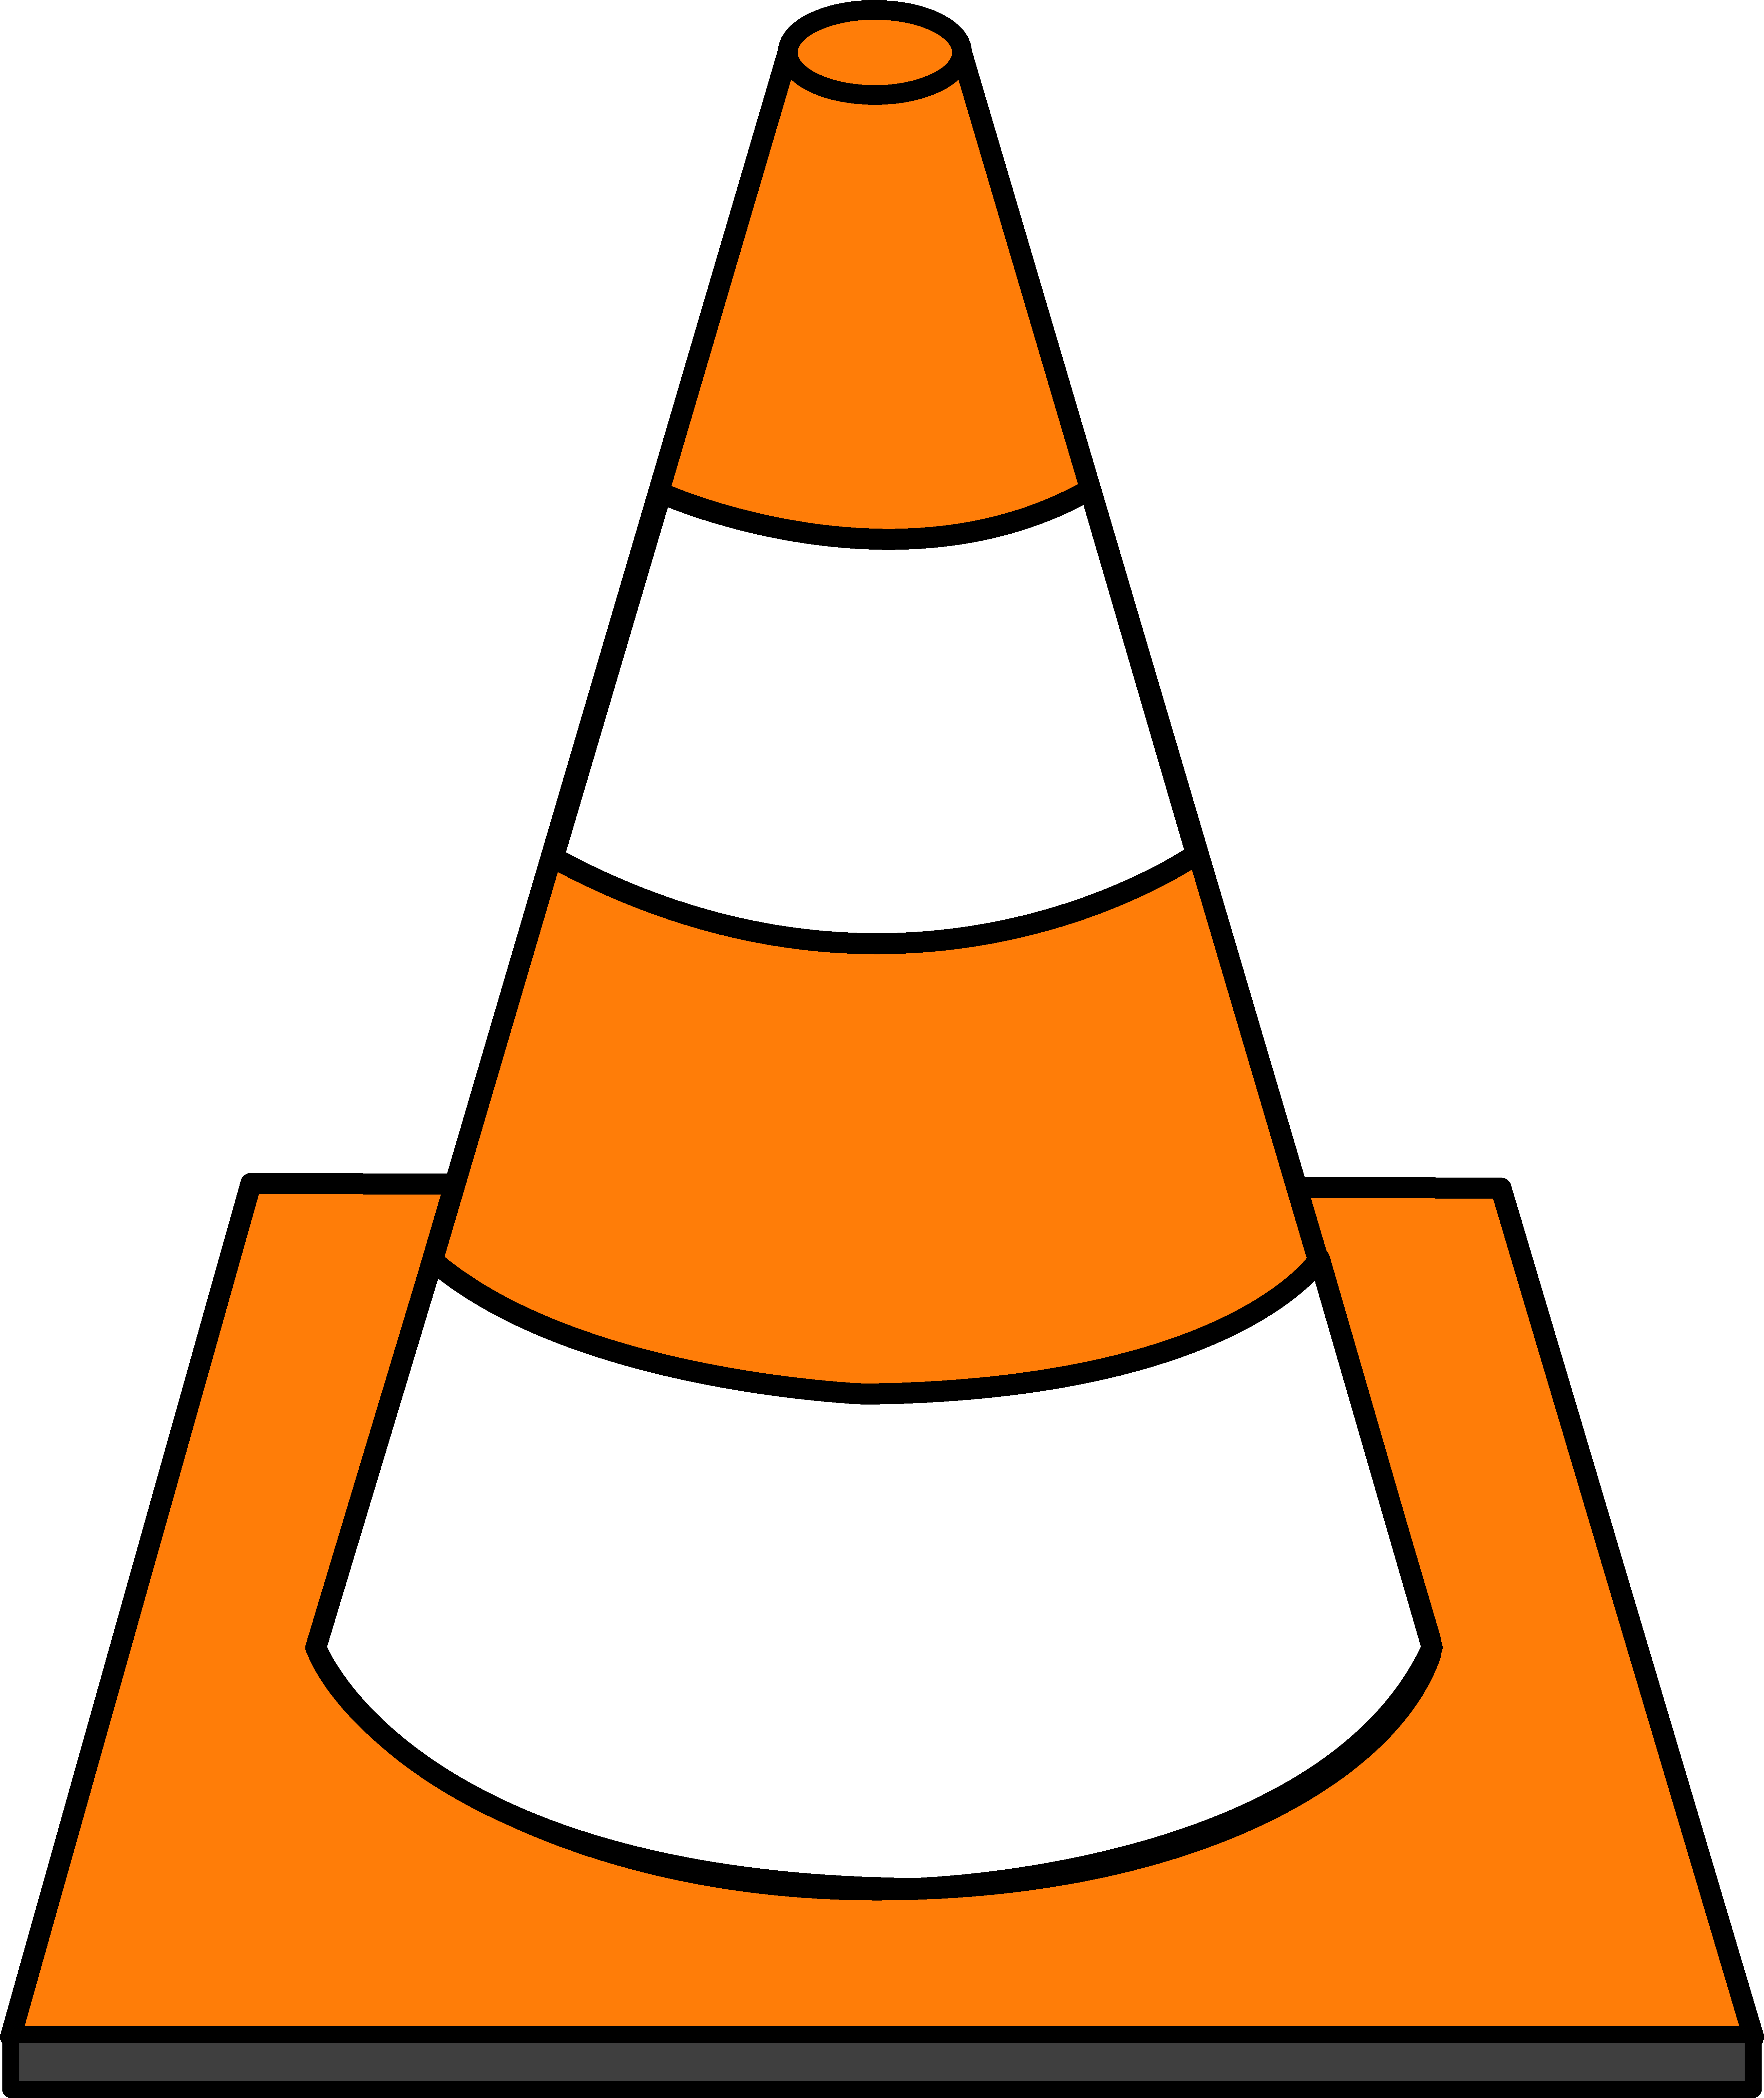 Cone panda free images. Contractor clipart construction zone